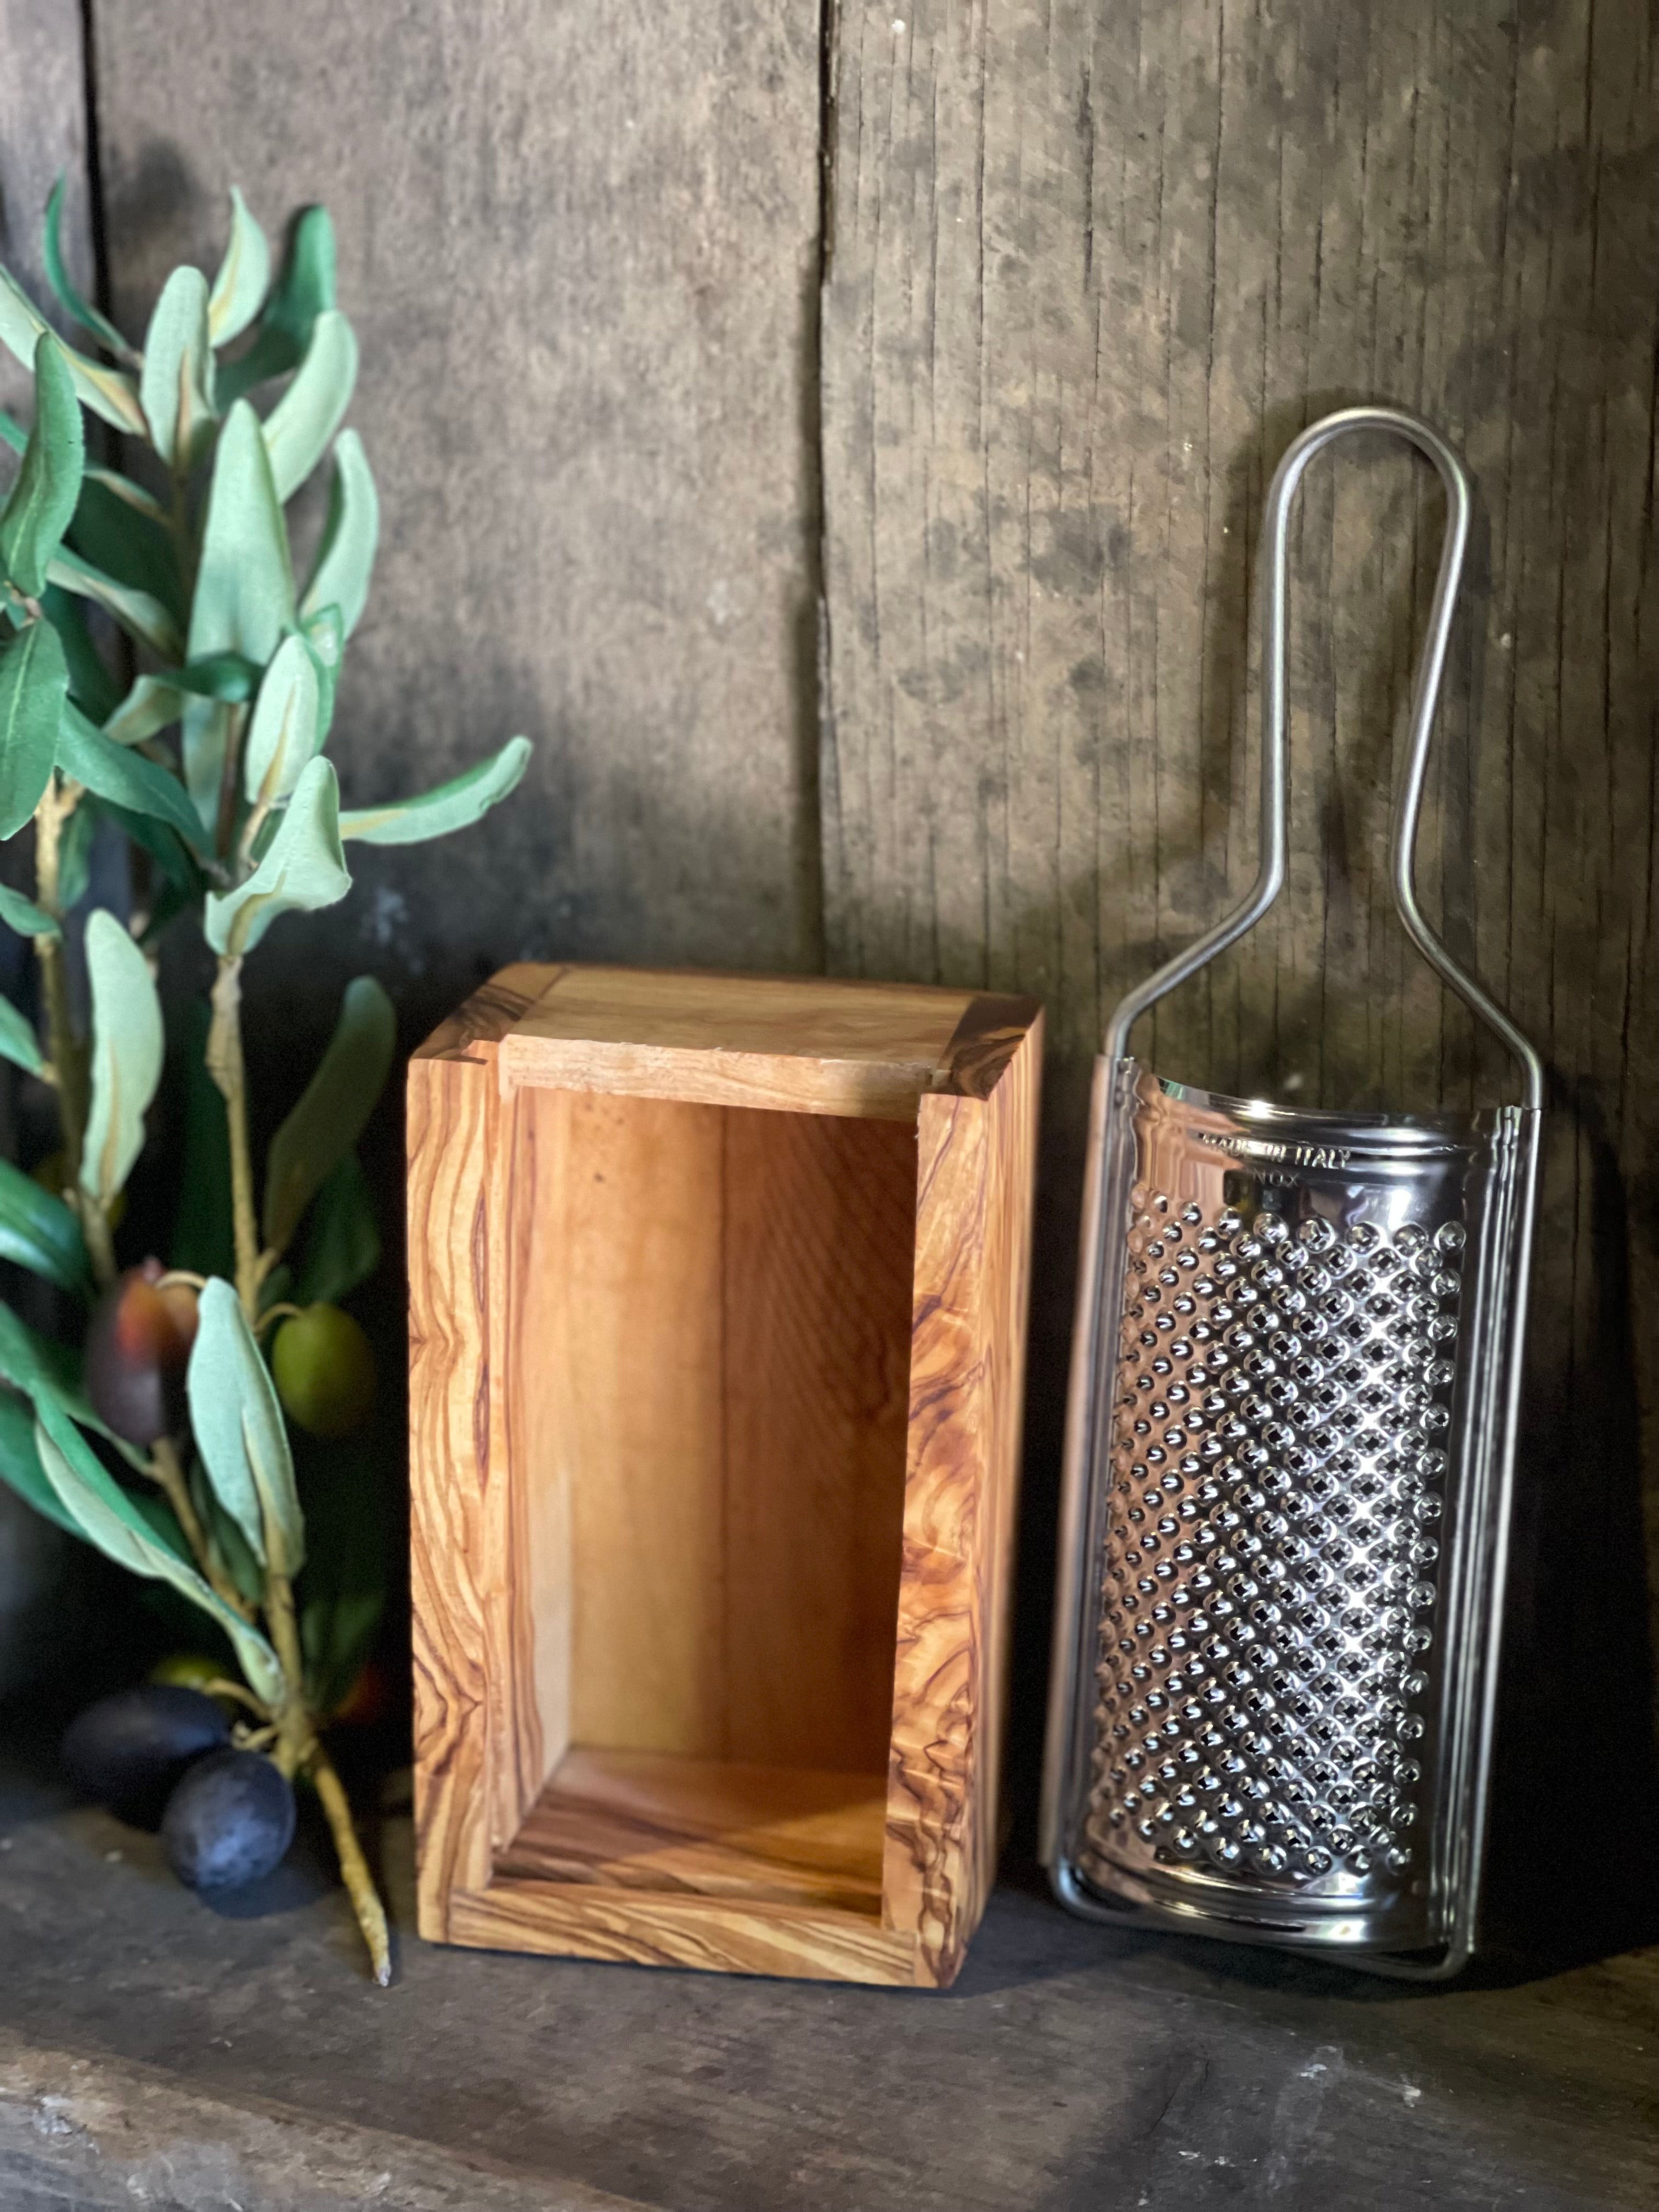 OLIVE WOOD GRATER WITH HANDLE